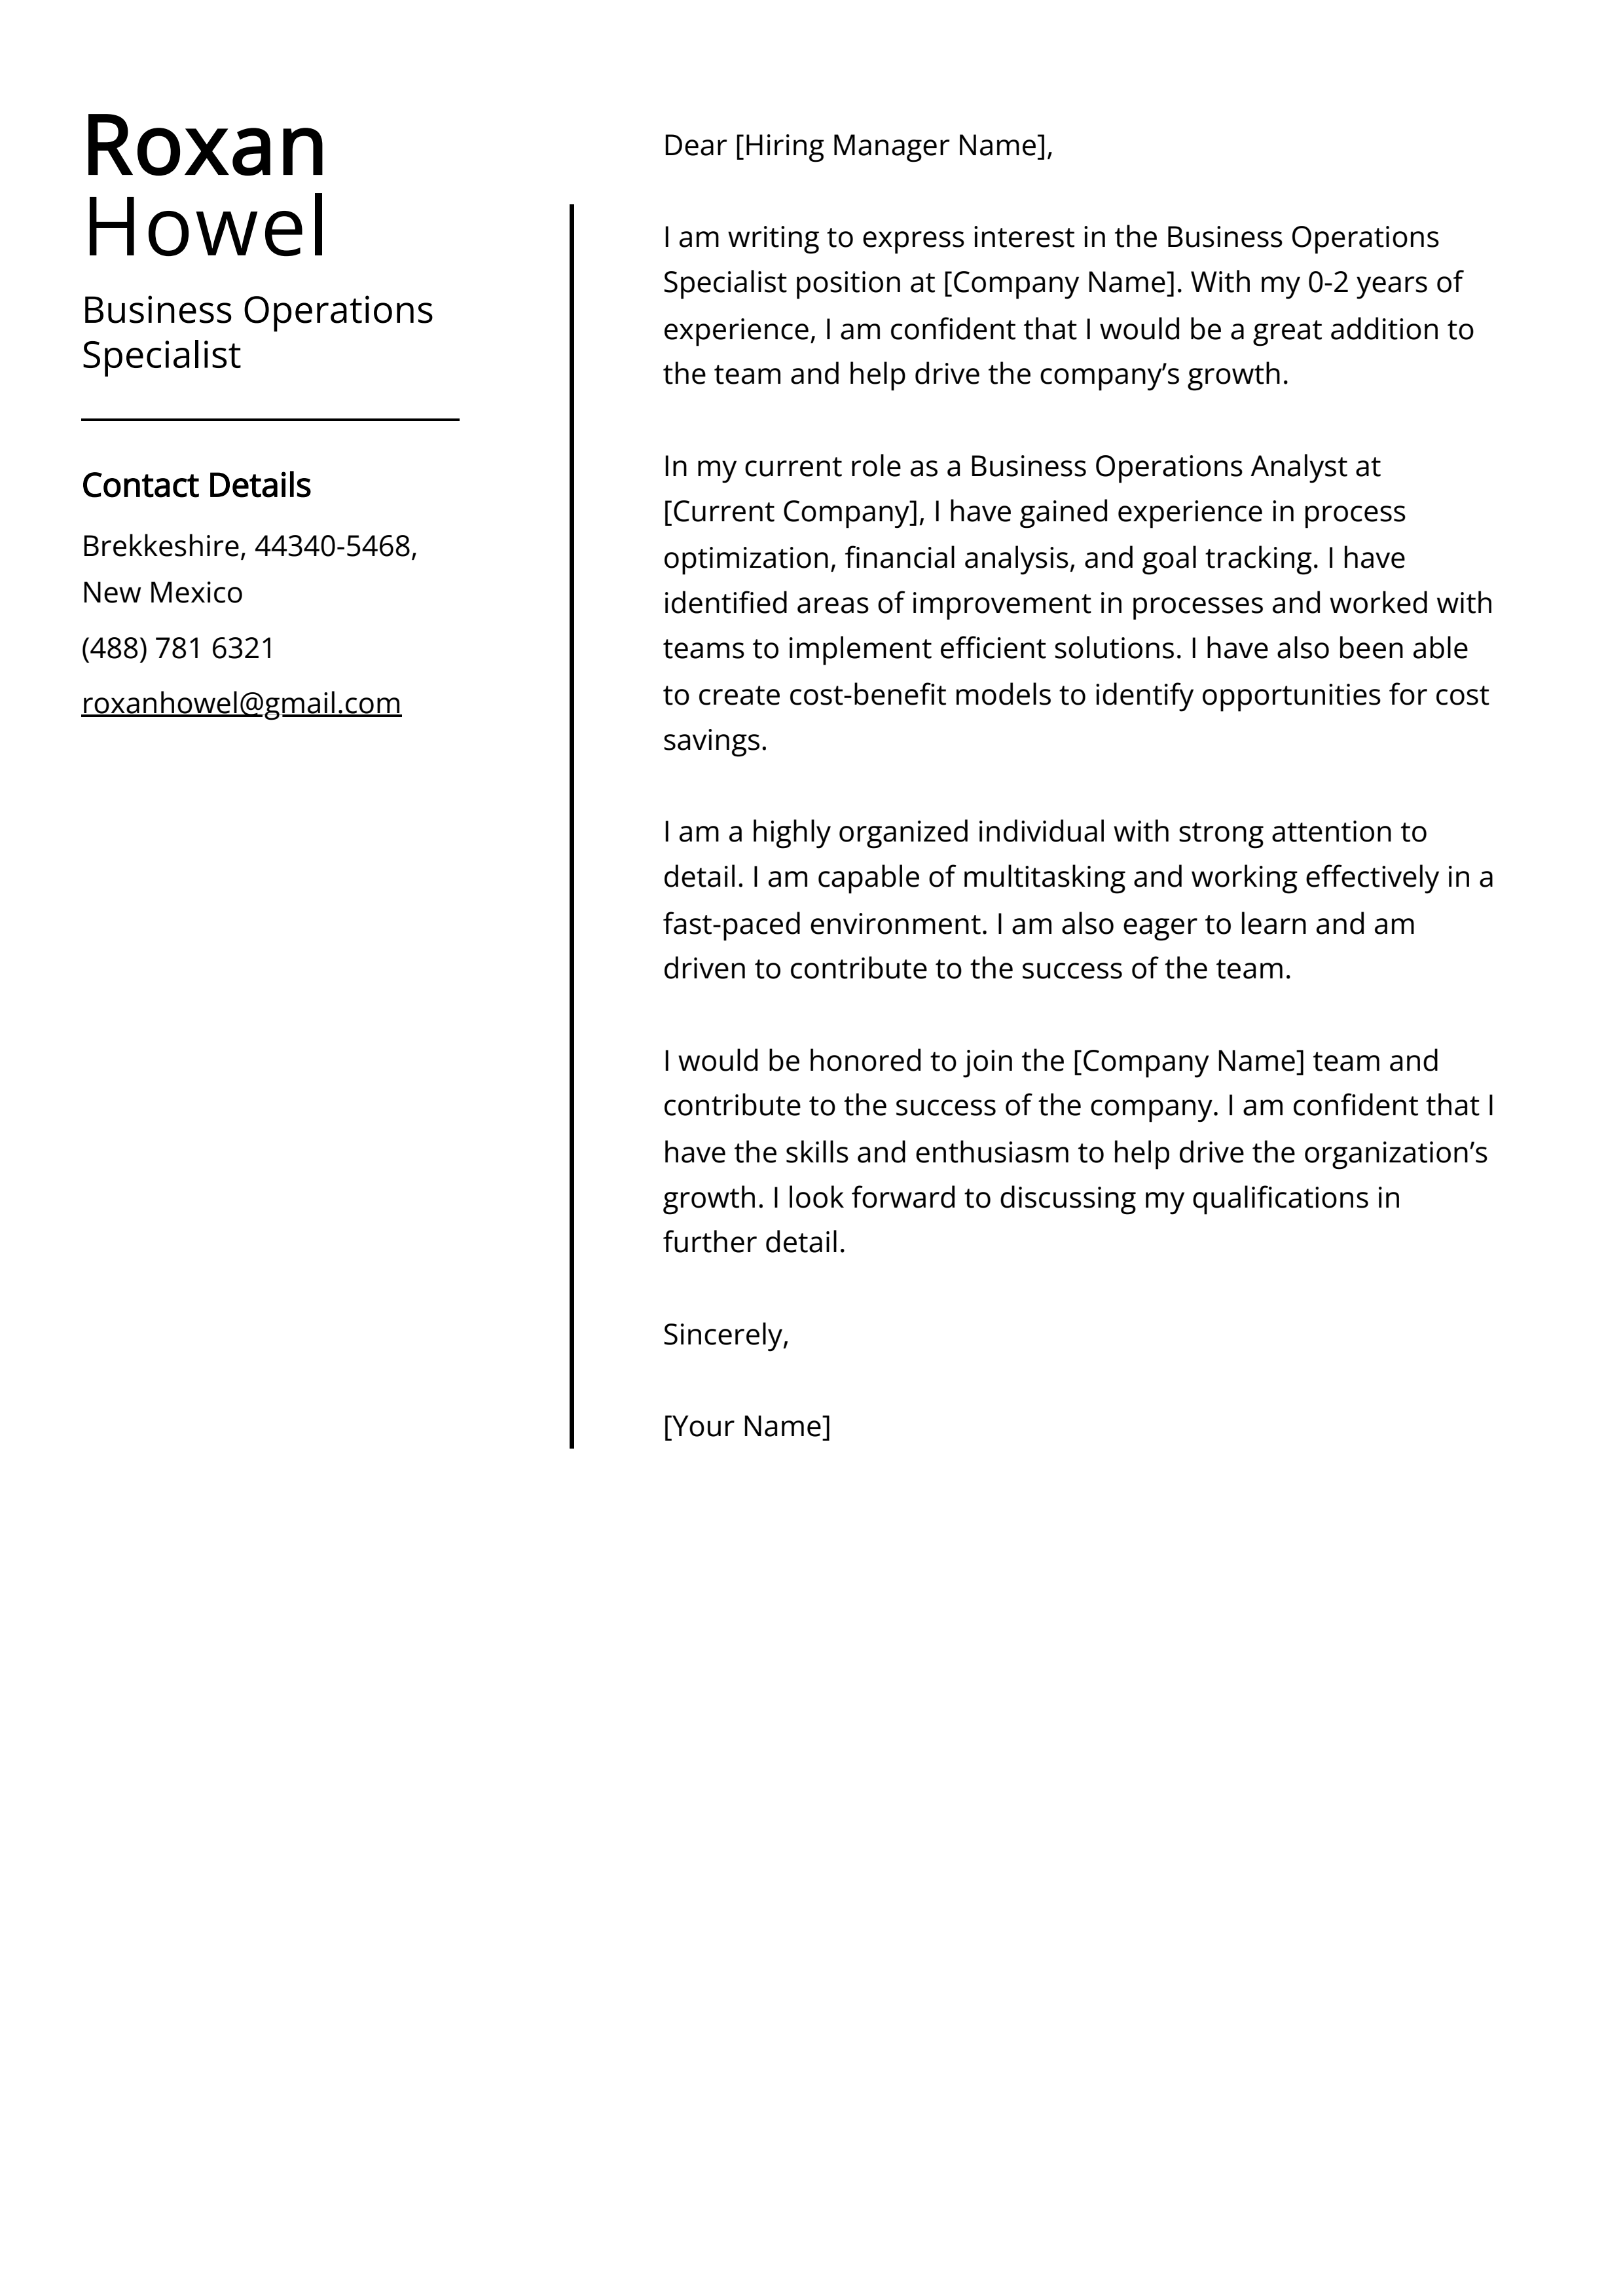 Business Operations Specialist Cover Letter Example